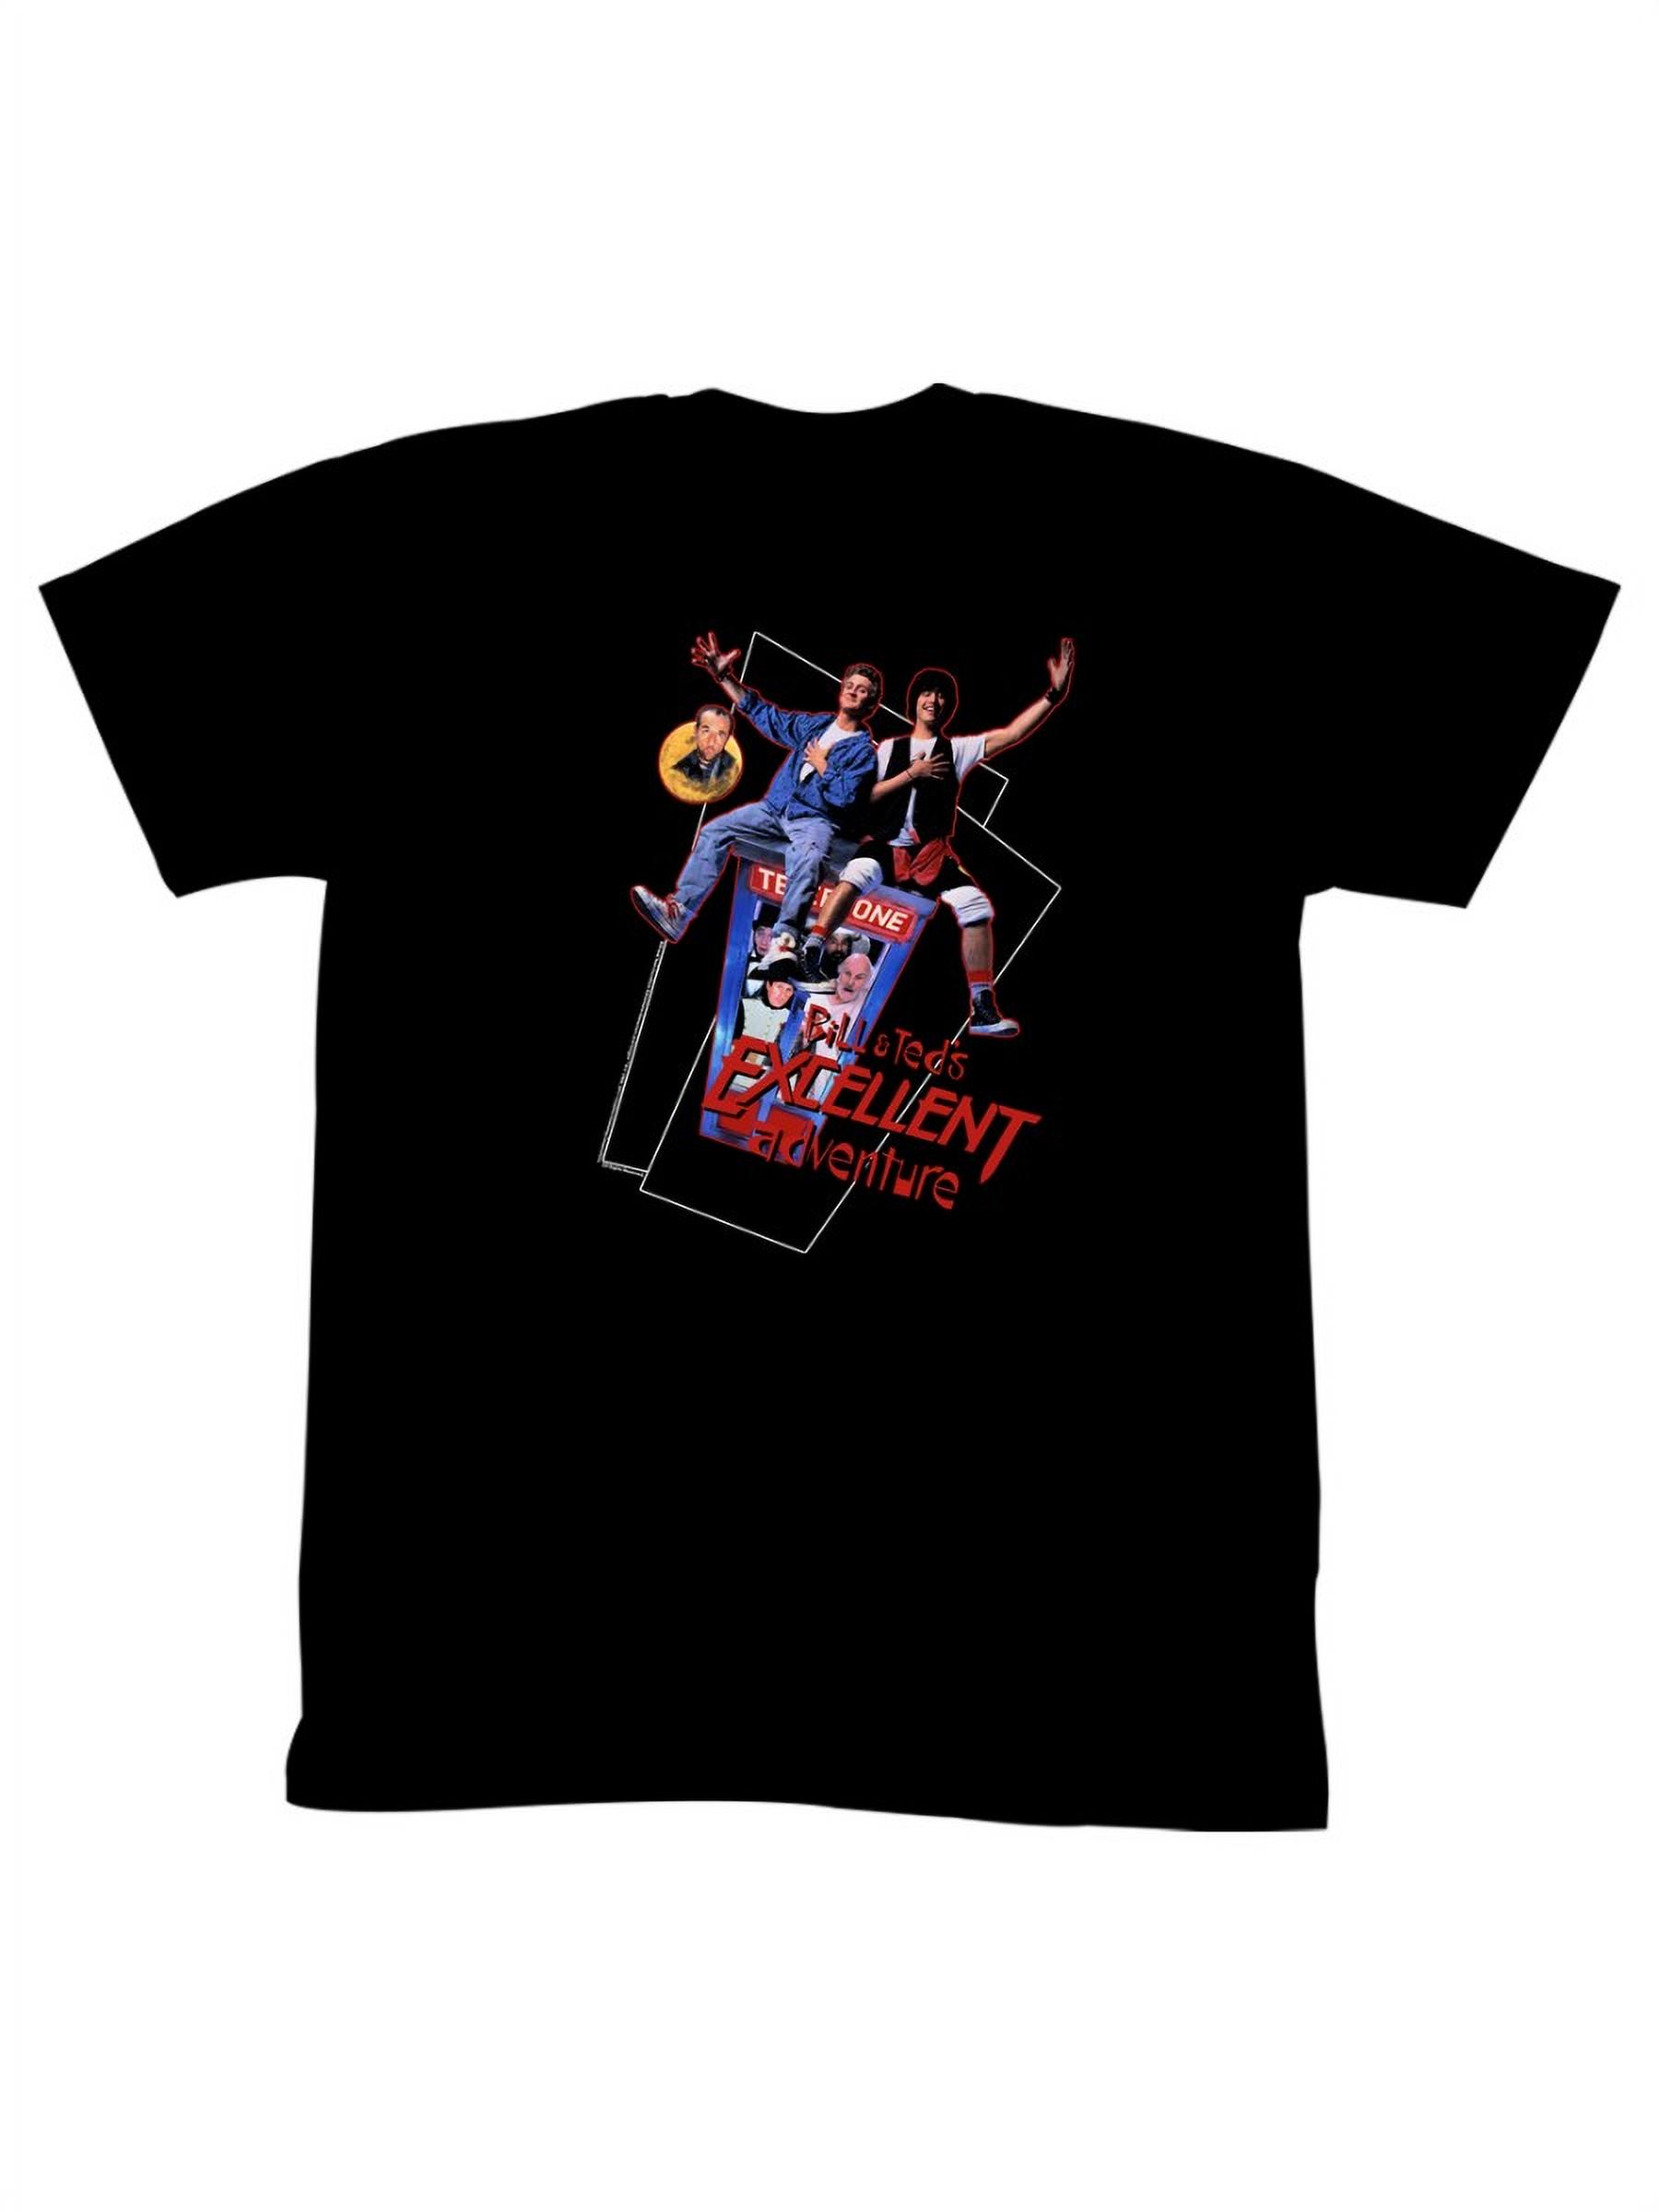 Bill&Ted's Excellent Adventure SciFi Comedy Movie Film Poster Adult T-Shirt - image 1 of 2